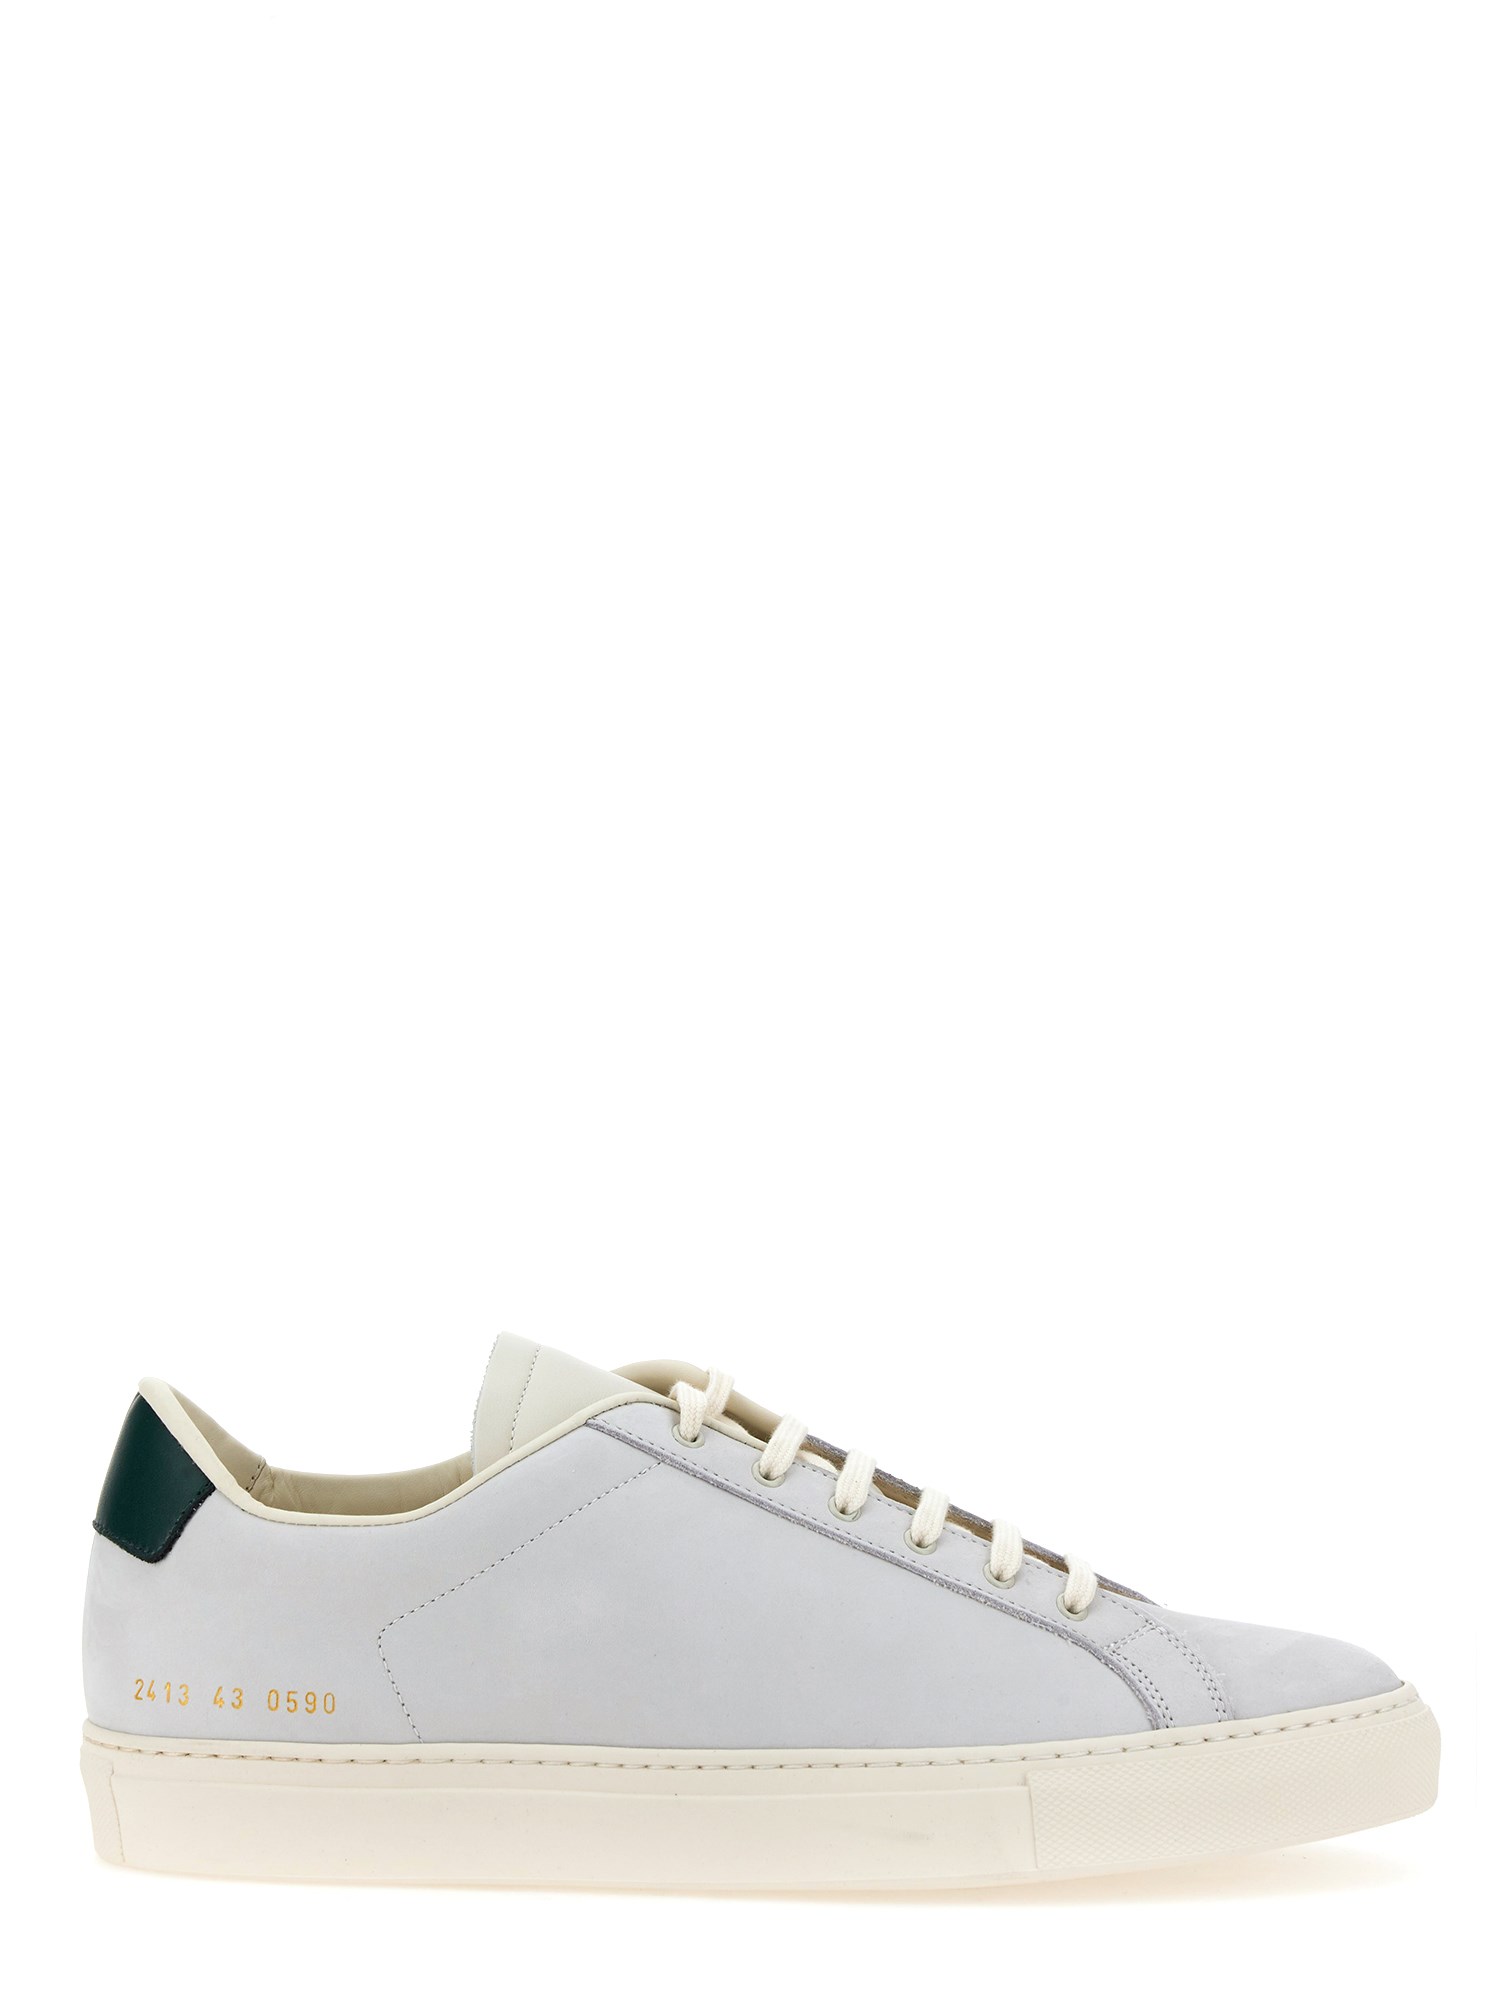 COMMON PROJECTS common projects "retro" sneaker